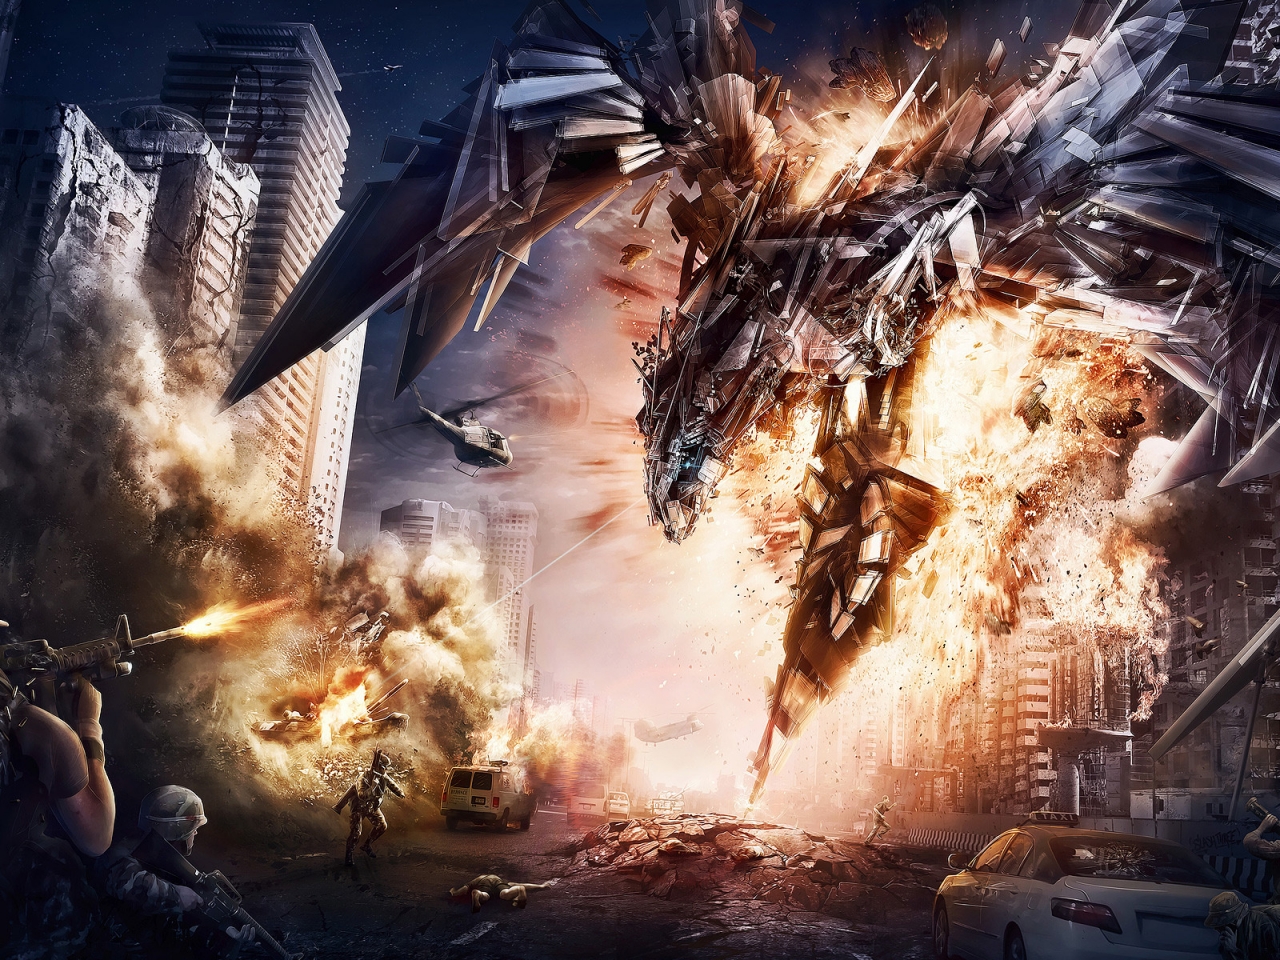 Transformers 4 Concept Art for 1280 x 960 resolution